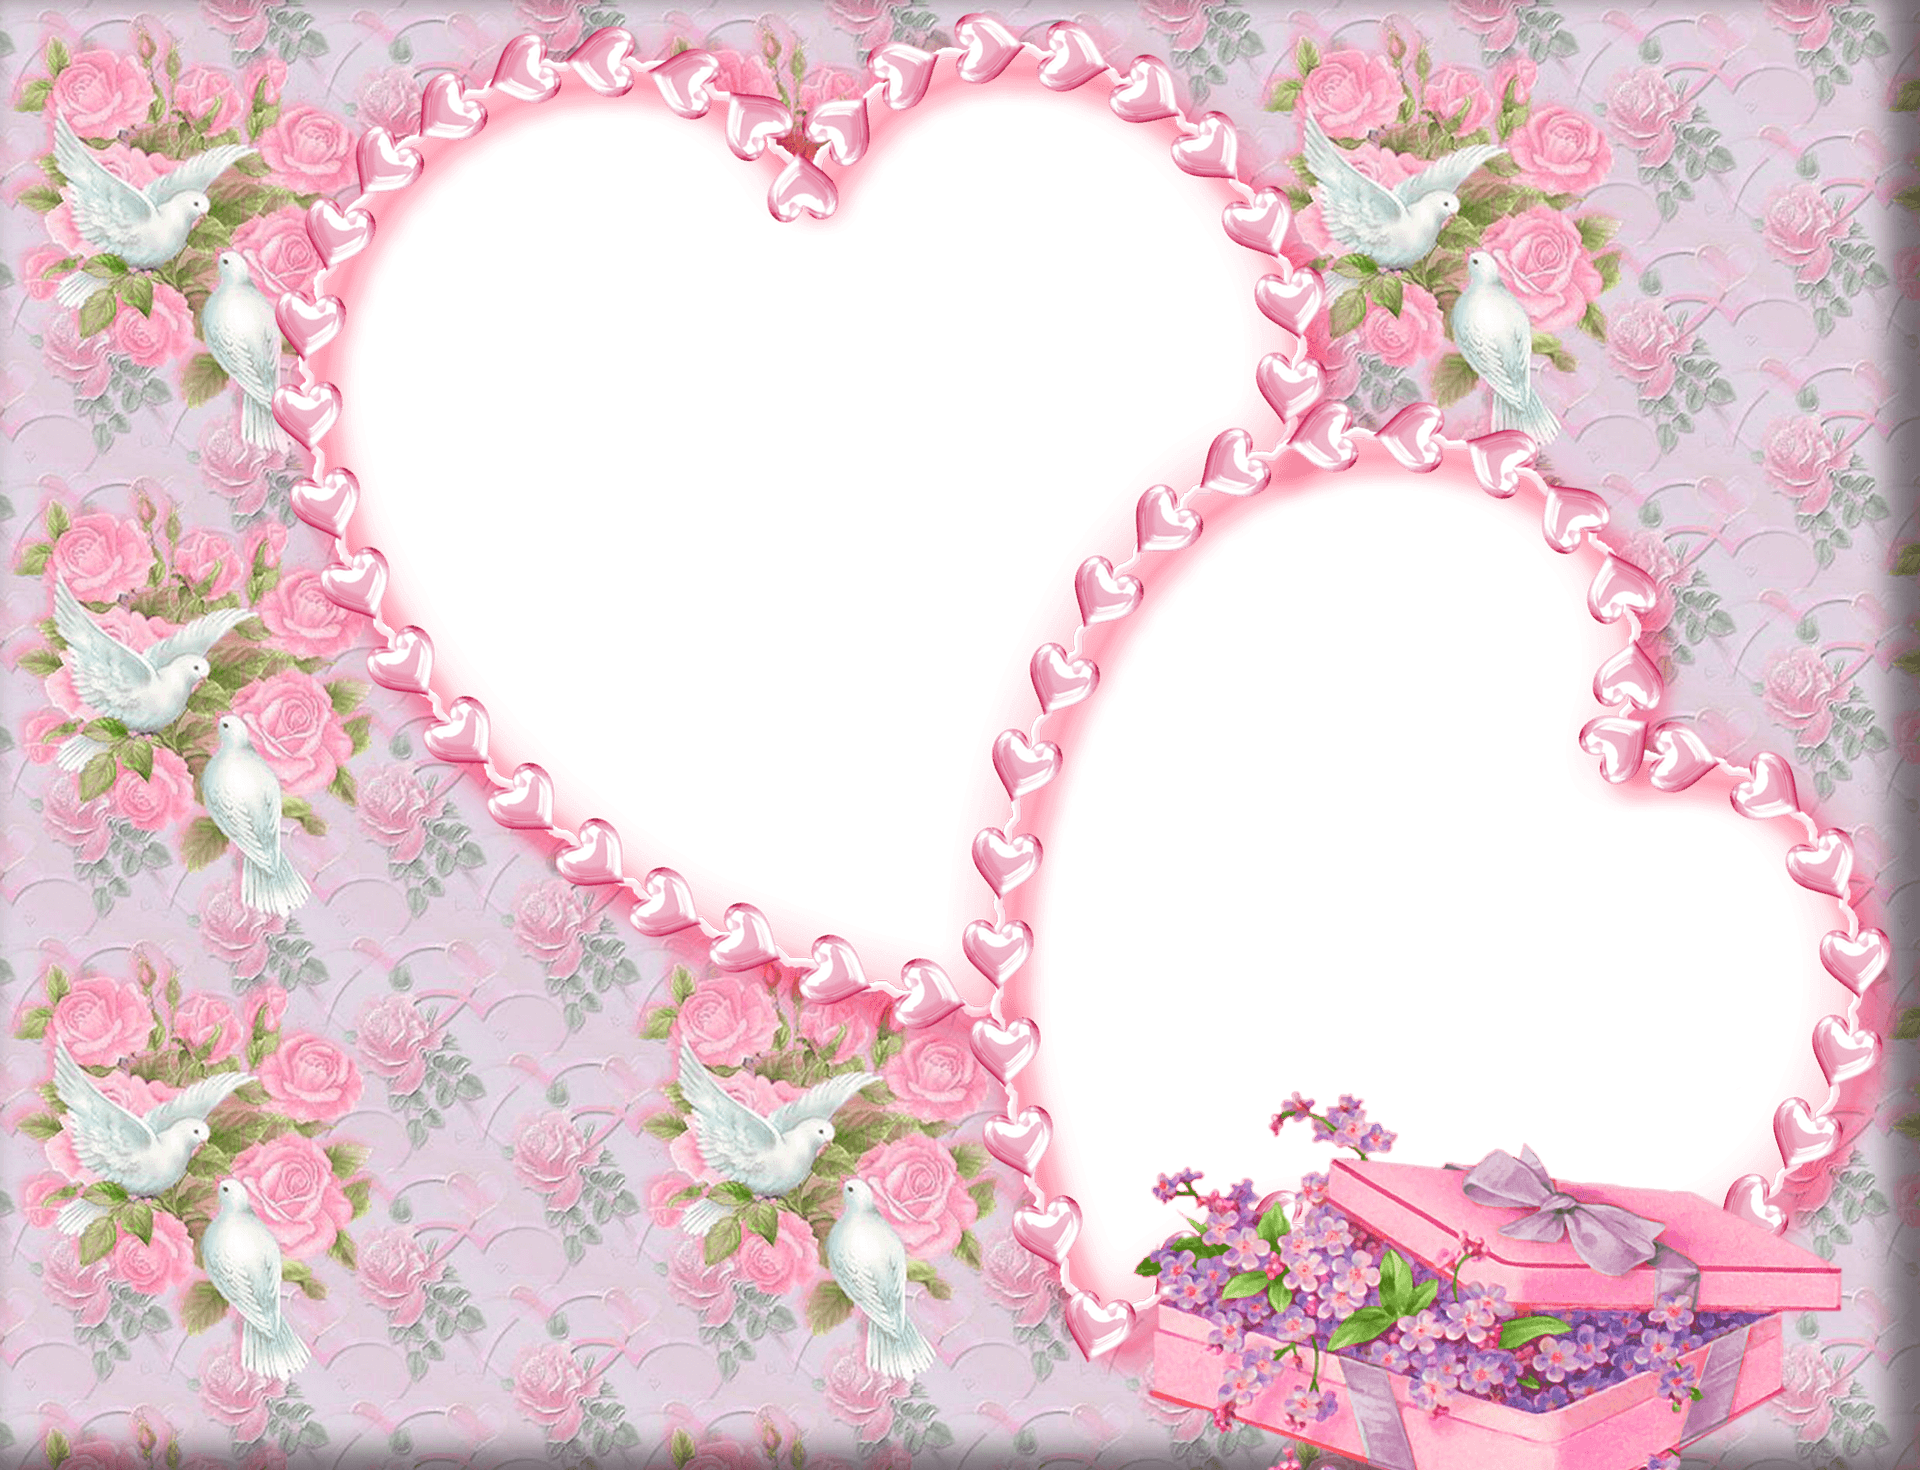 Two Hearts With Flowers And A Box